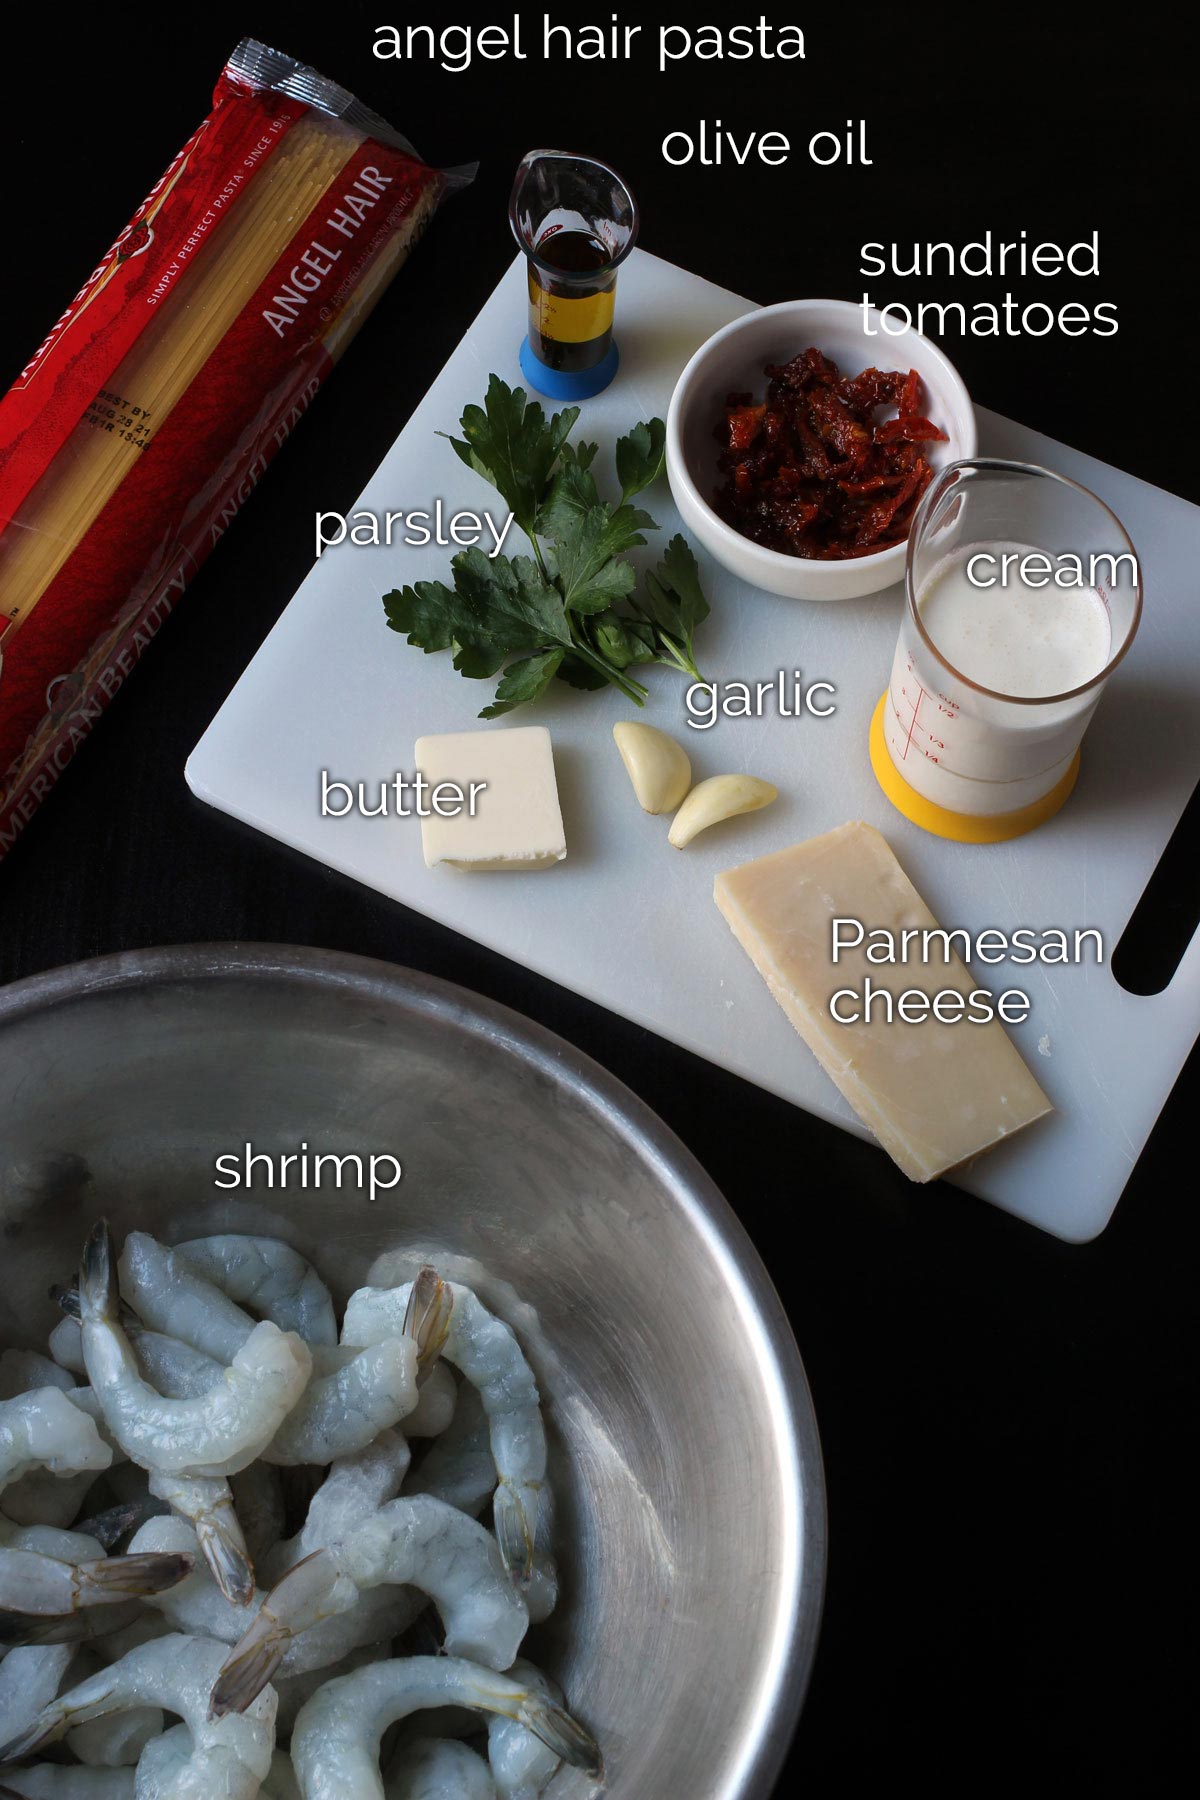 ingredients for shrimp pasta dish laid out on cutting board and on black table.